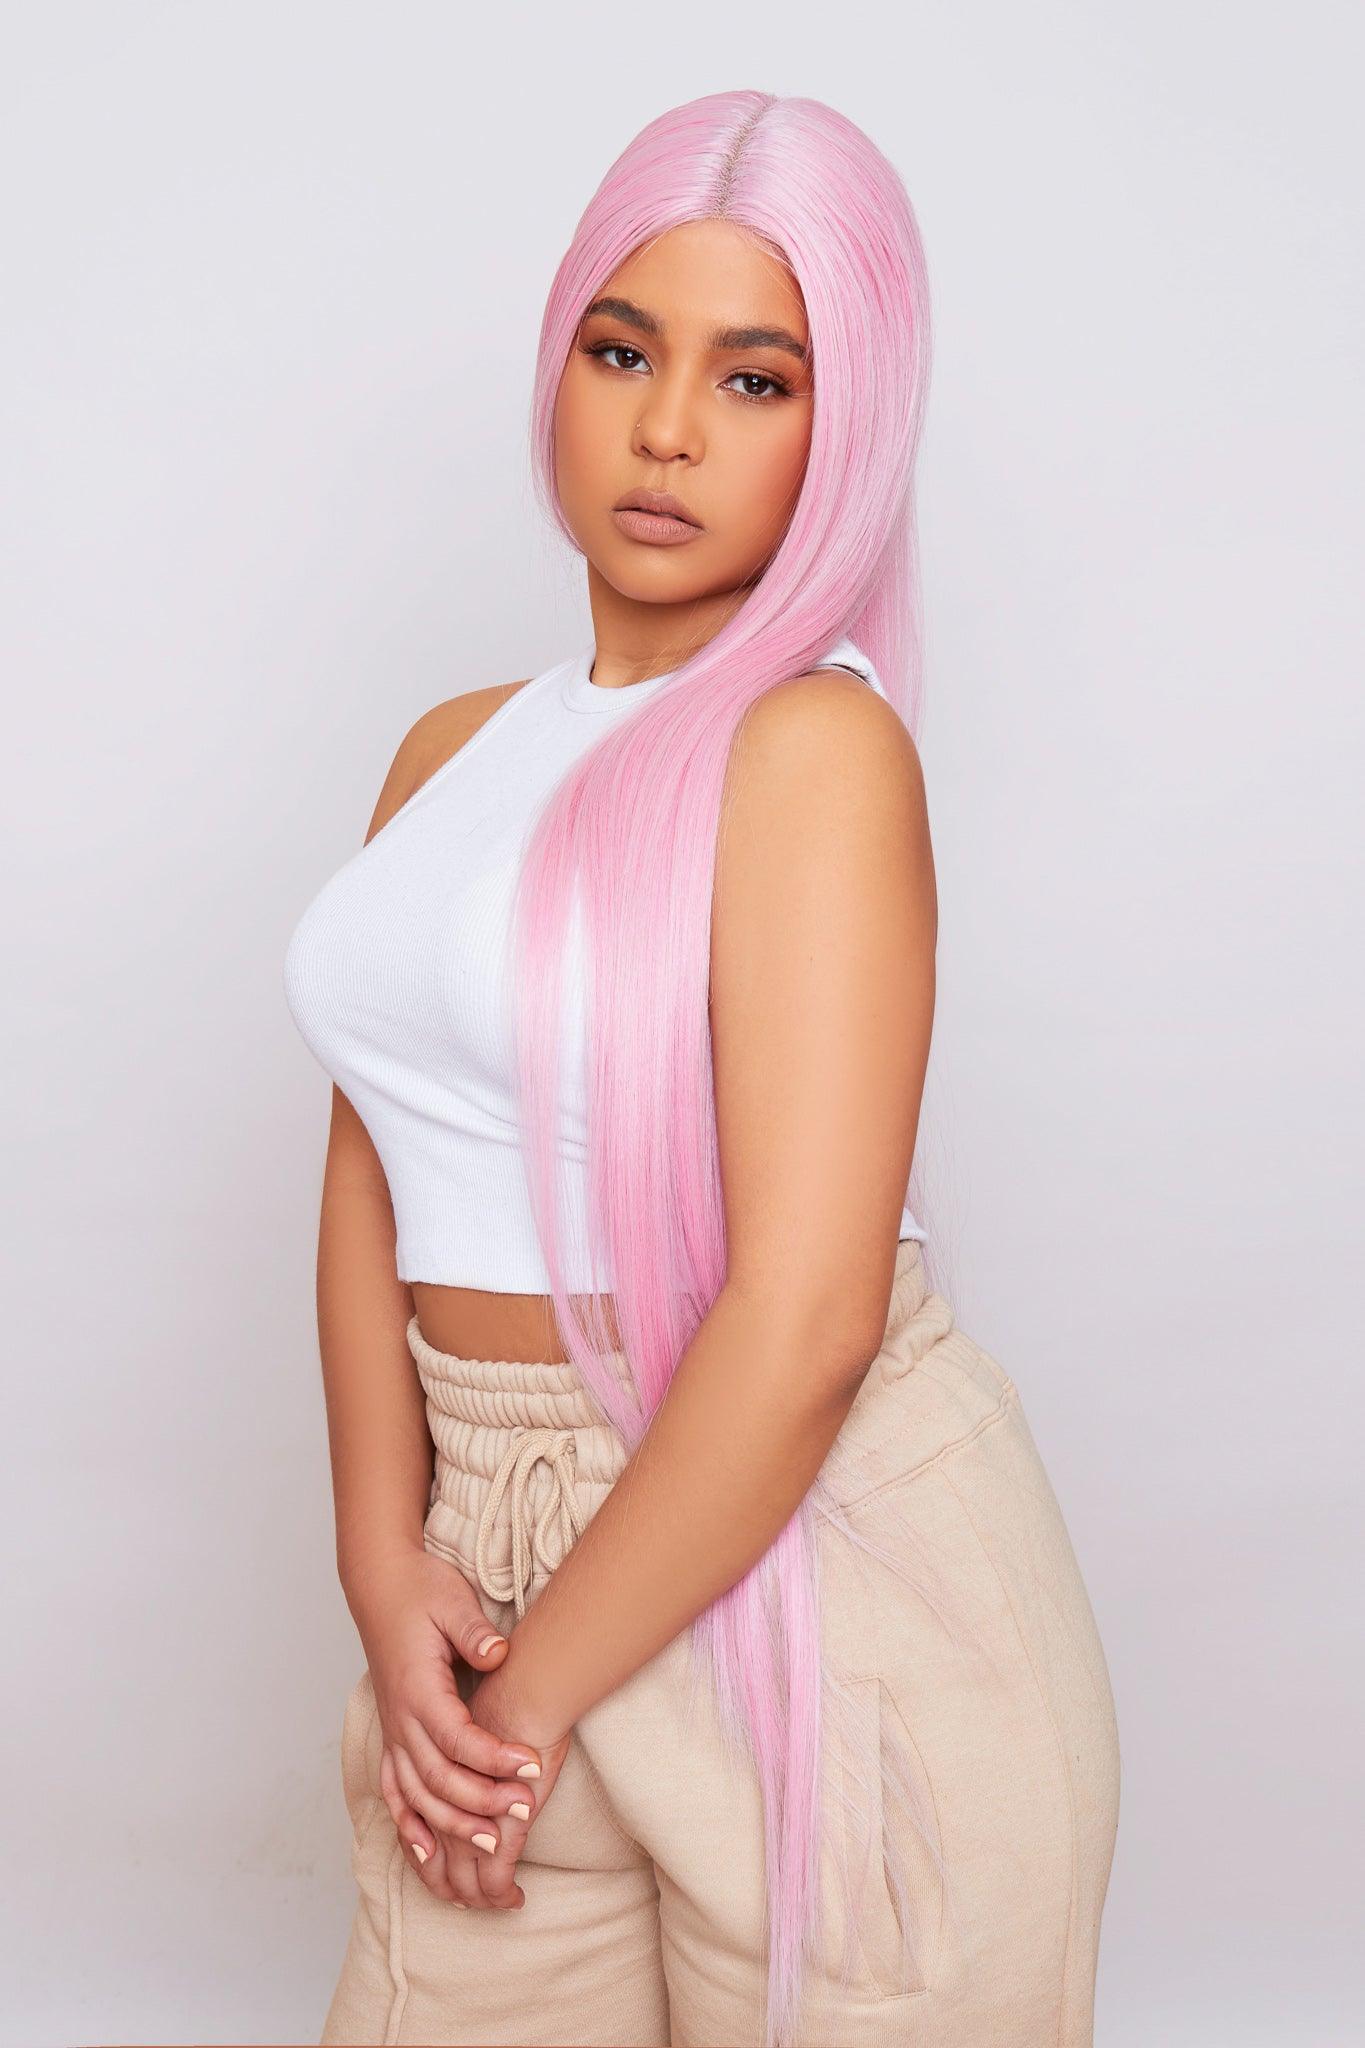 Pink lace front synthetic hair wig worn by mixed race model